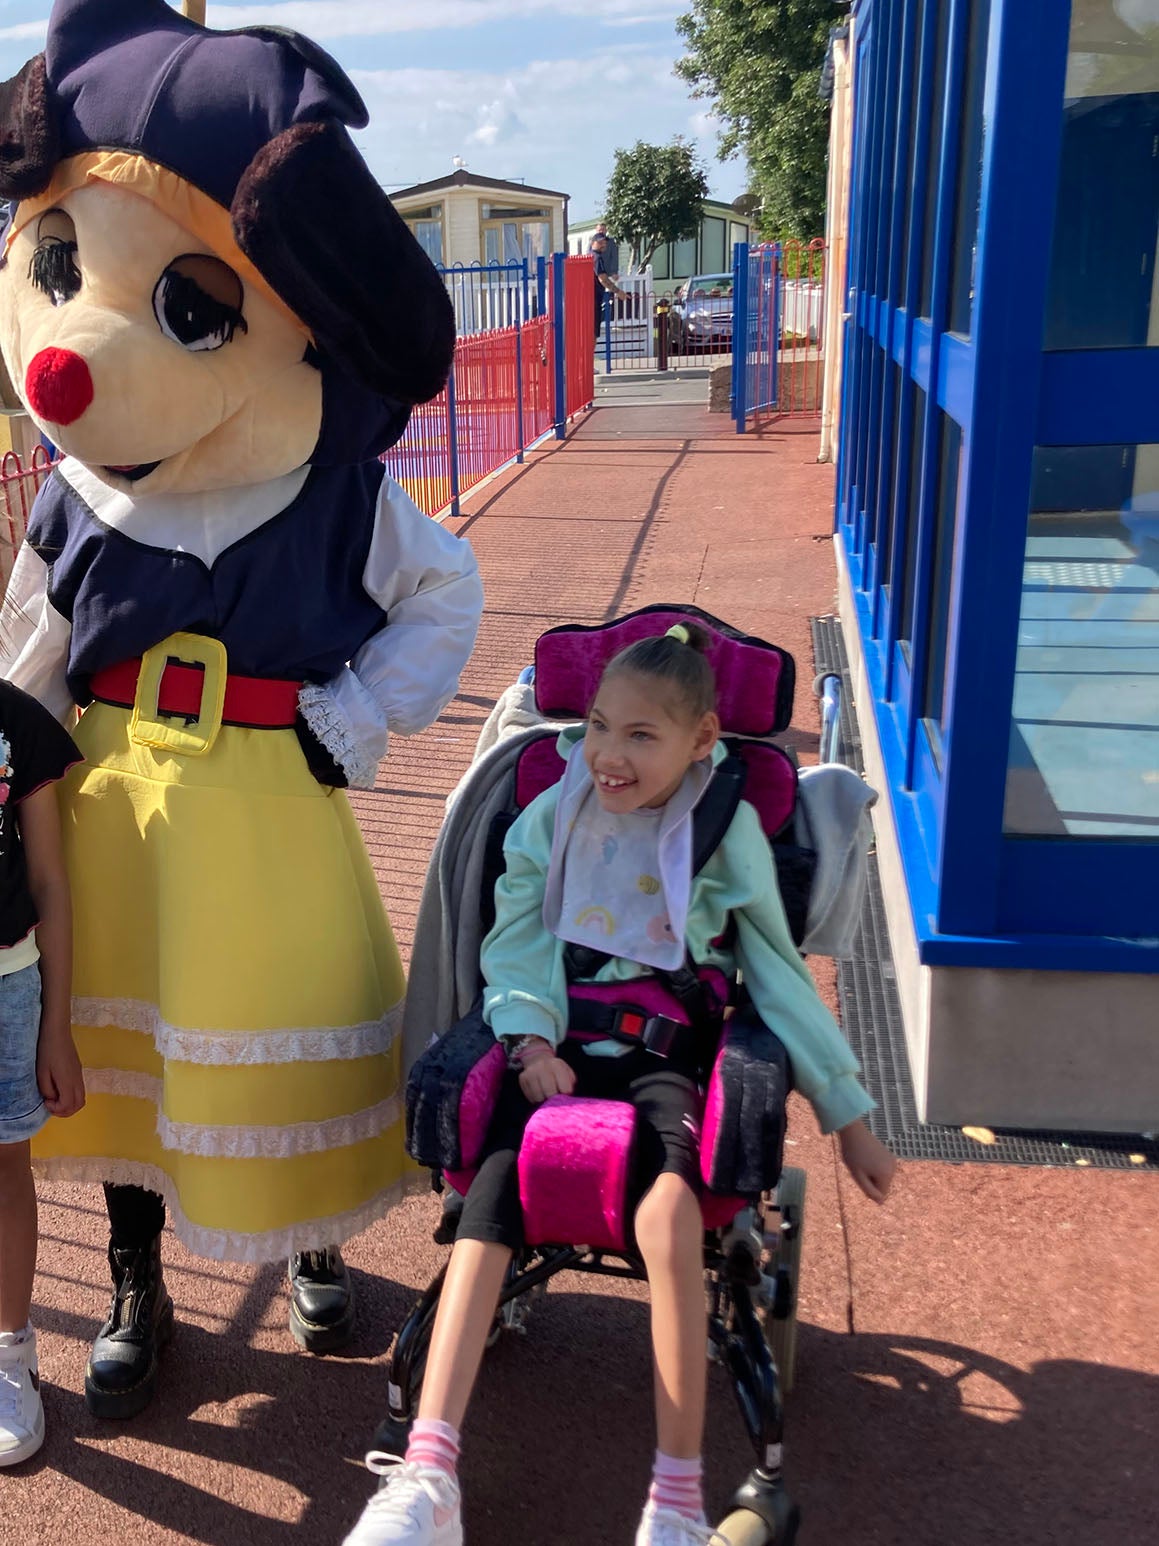 A smiling girl in a wheelchair next to a person dressed in a dog costume